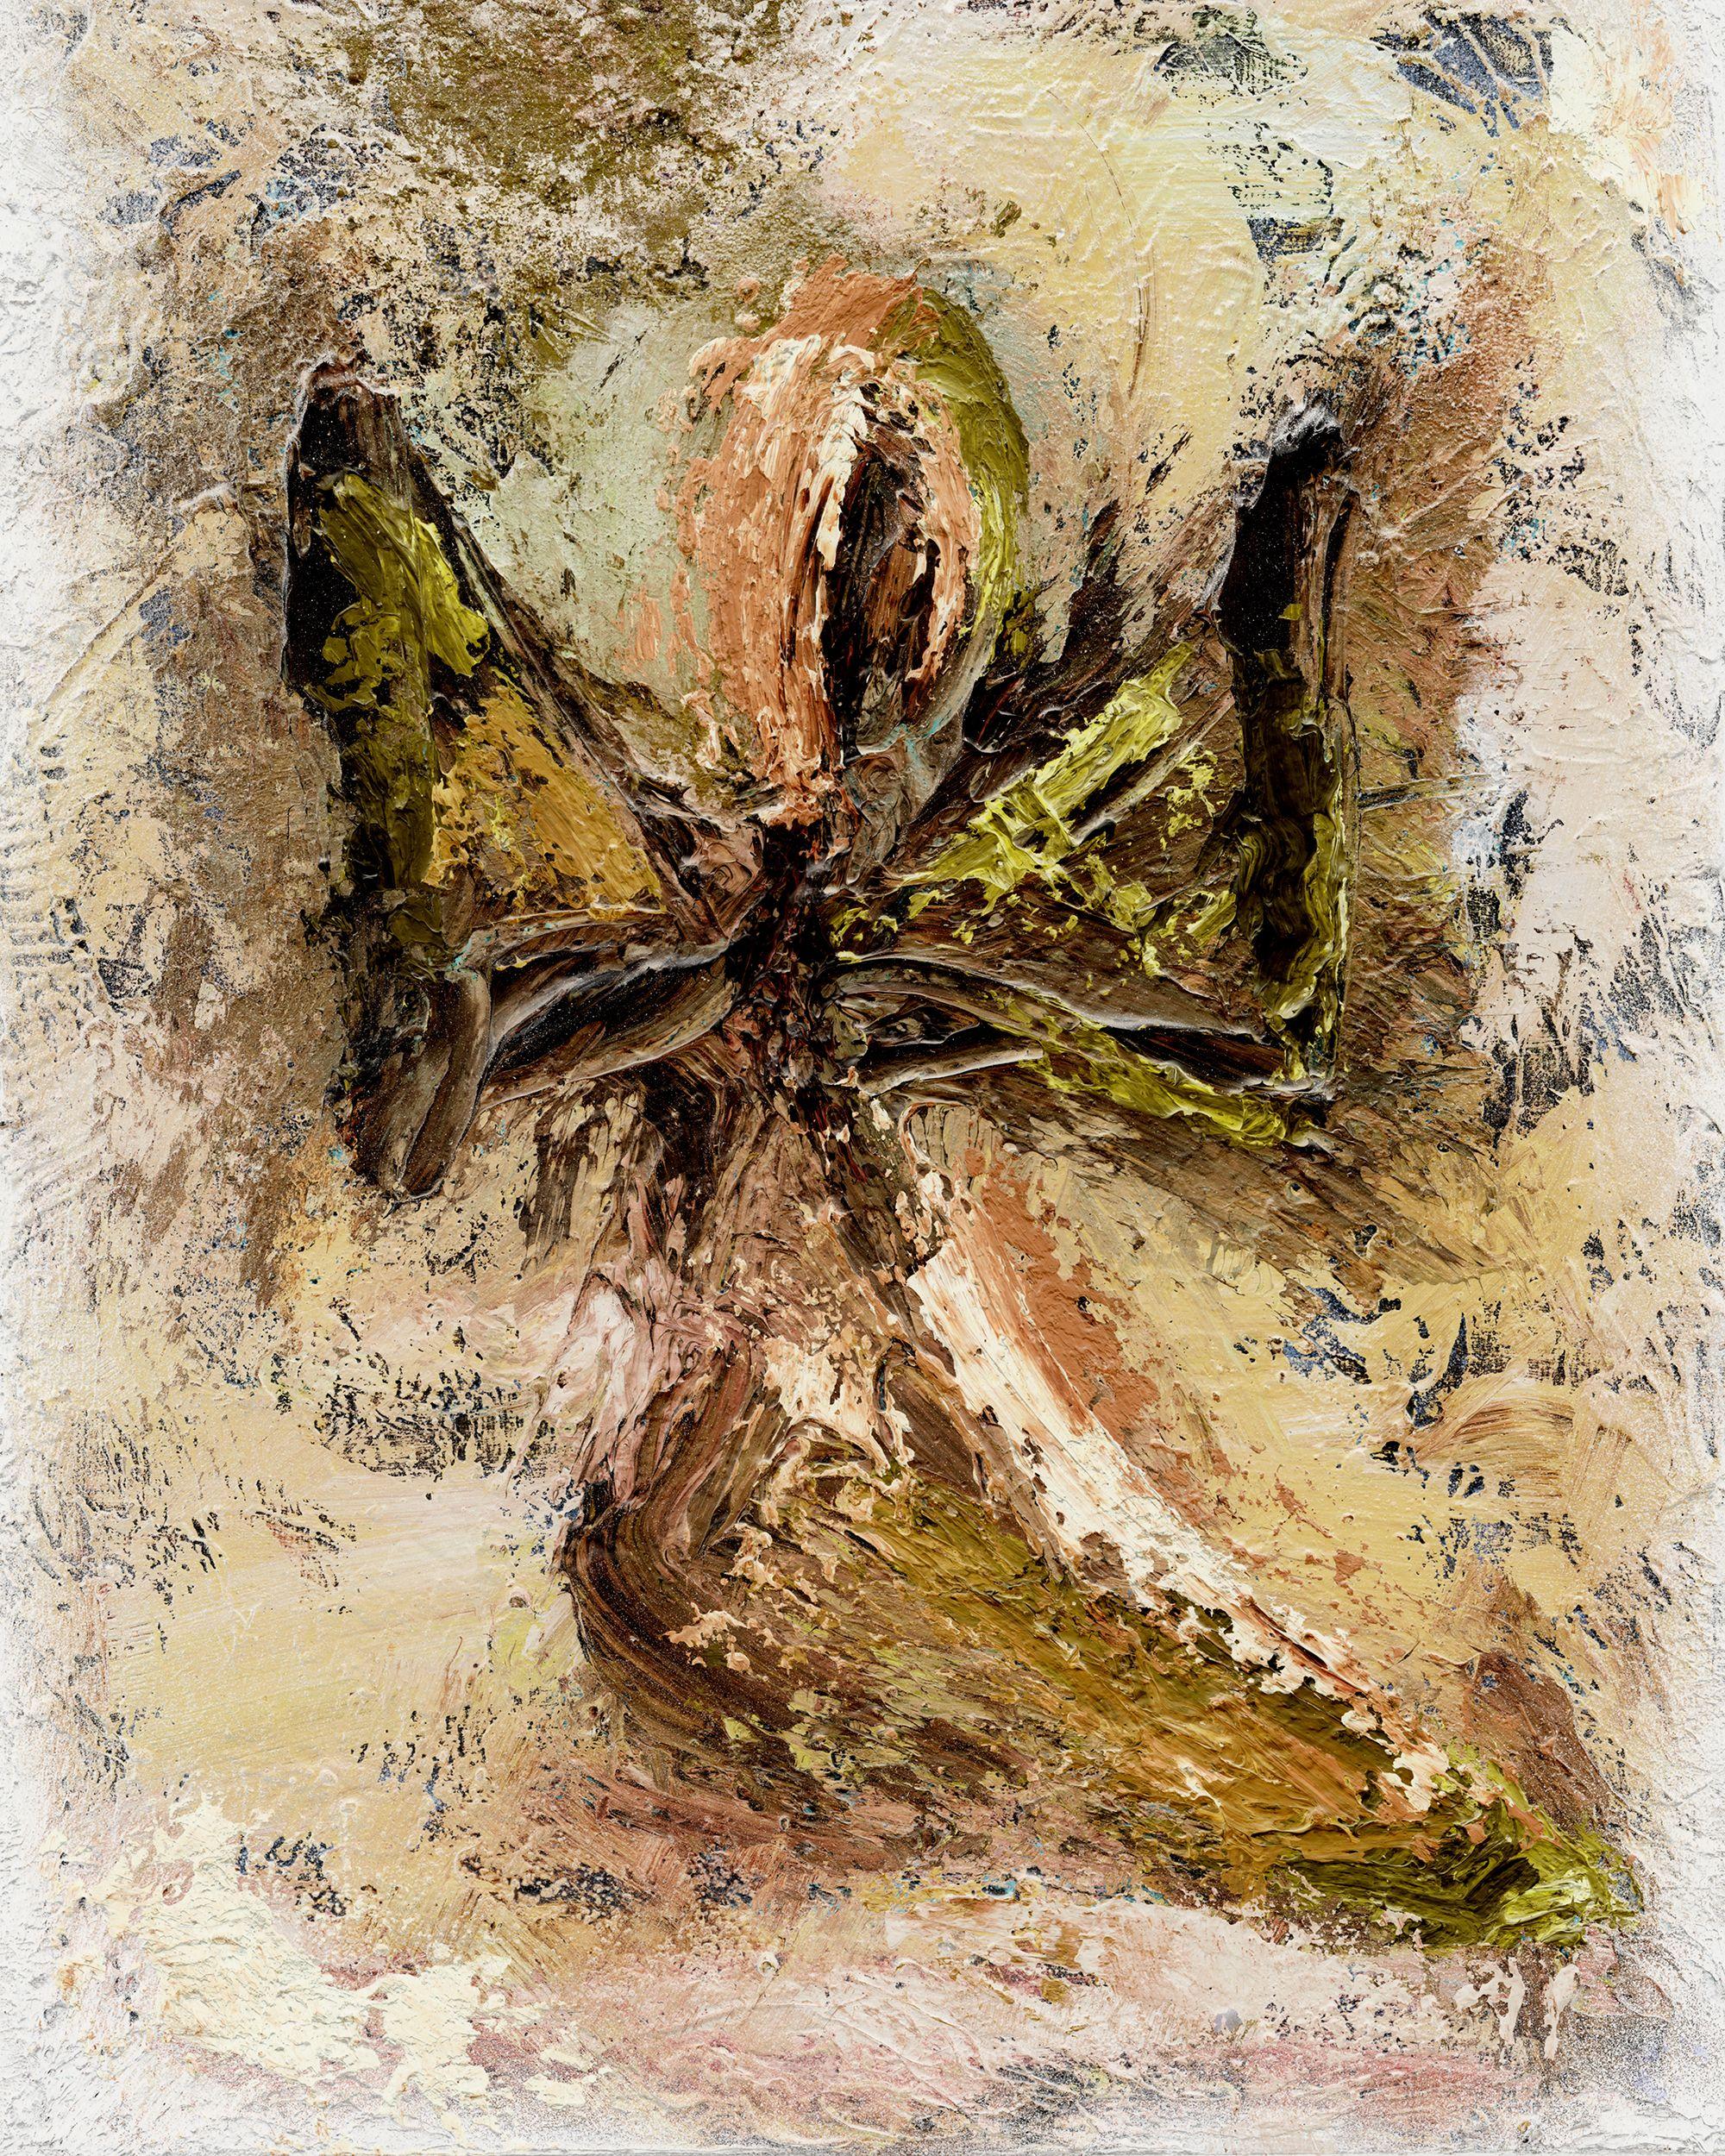 AngelScape - Angel of Hope I (Earth Tones), Mixed Media on Canvas - Mixed Media Art by Michele Morata